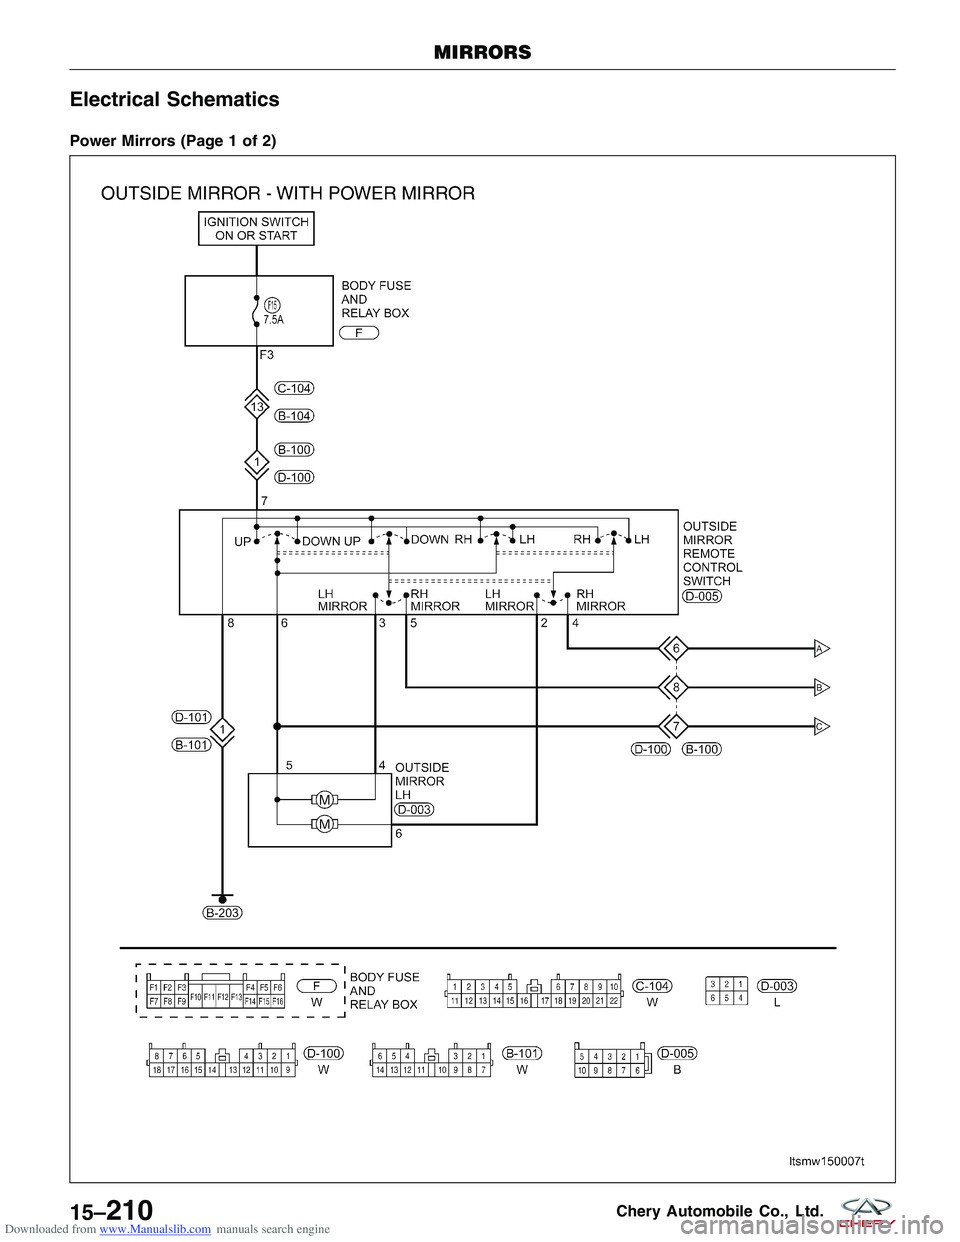 CHERY TIGGO 2009  Service Repair Manual Downloaded from www.Manualslib.com manuals search engine Electrical Schematics
Power Mirrors (Page 1 of 2)
MIRRORS
LTSMW150007T
15–210Chery Automobile Co., Ltd.  